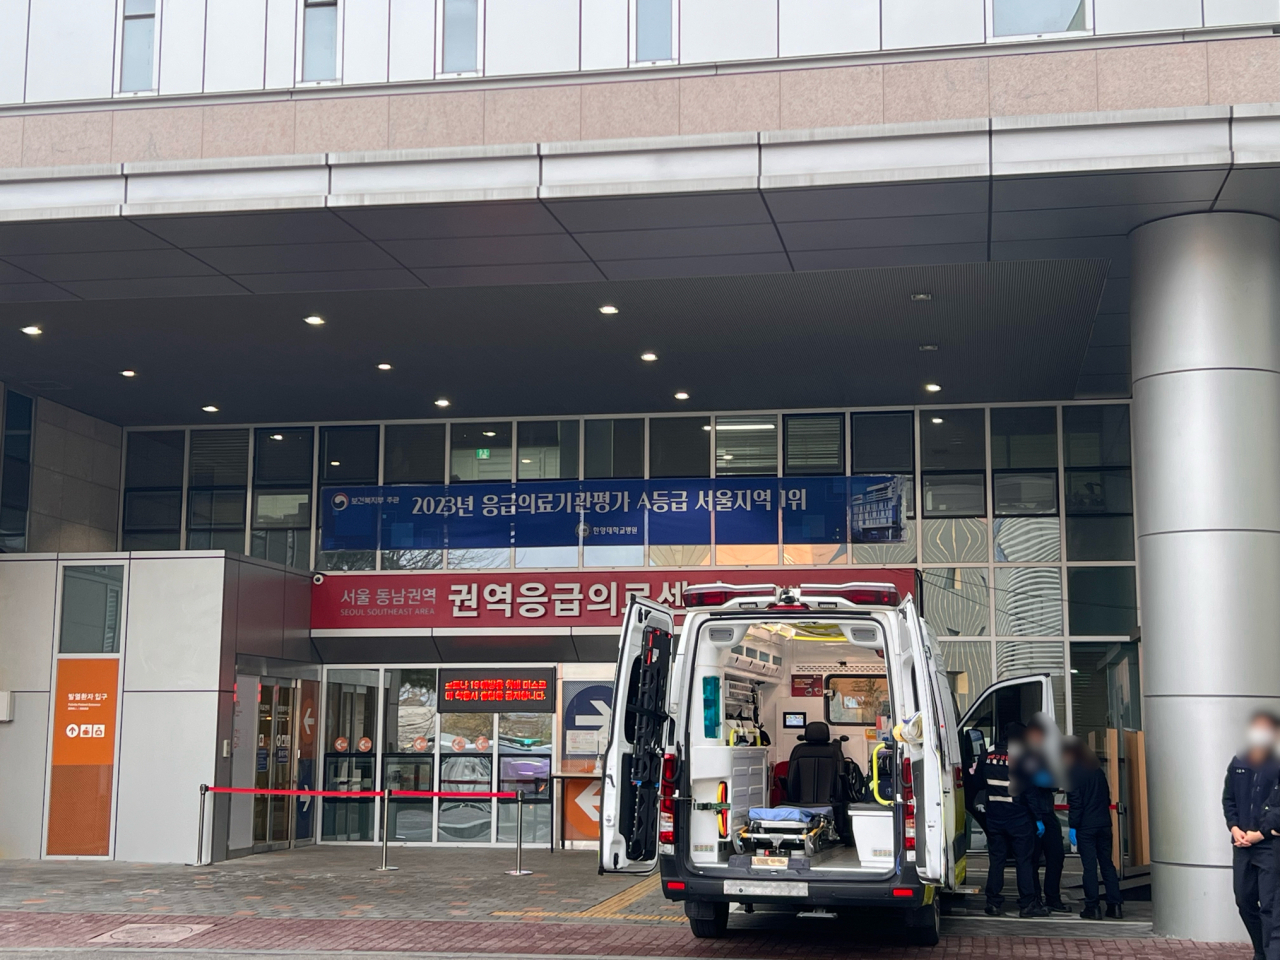 119 paramedics are seen cleaning up the ambulance after escorting a patient into the emergency room at Hanyang University Seoul Hospital in Seongdong-gu, eastern Seoul, Friday. (Park Jun-hee/The Korea Herald)